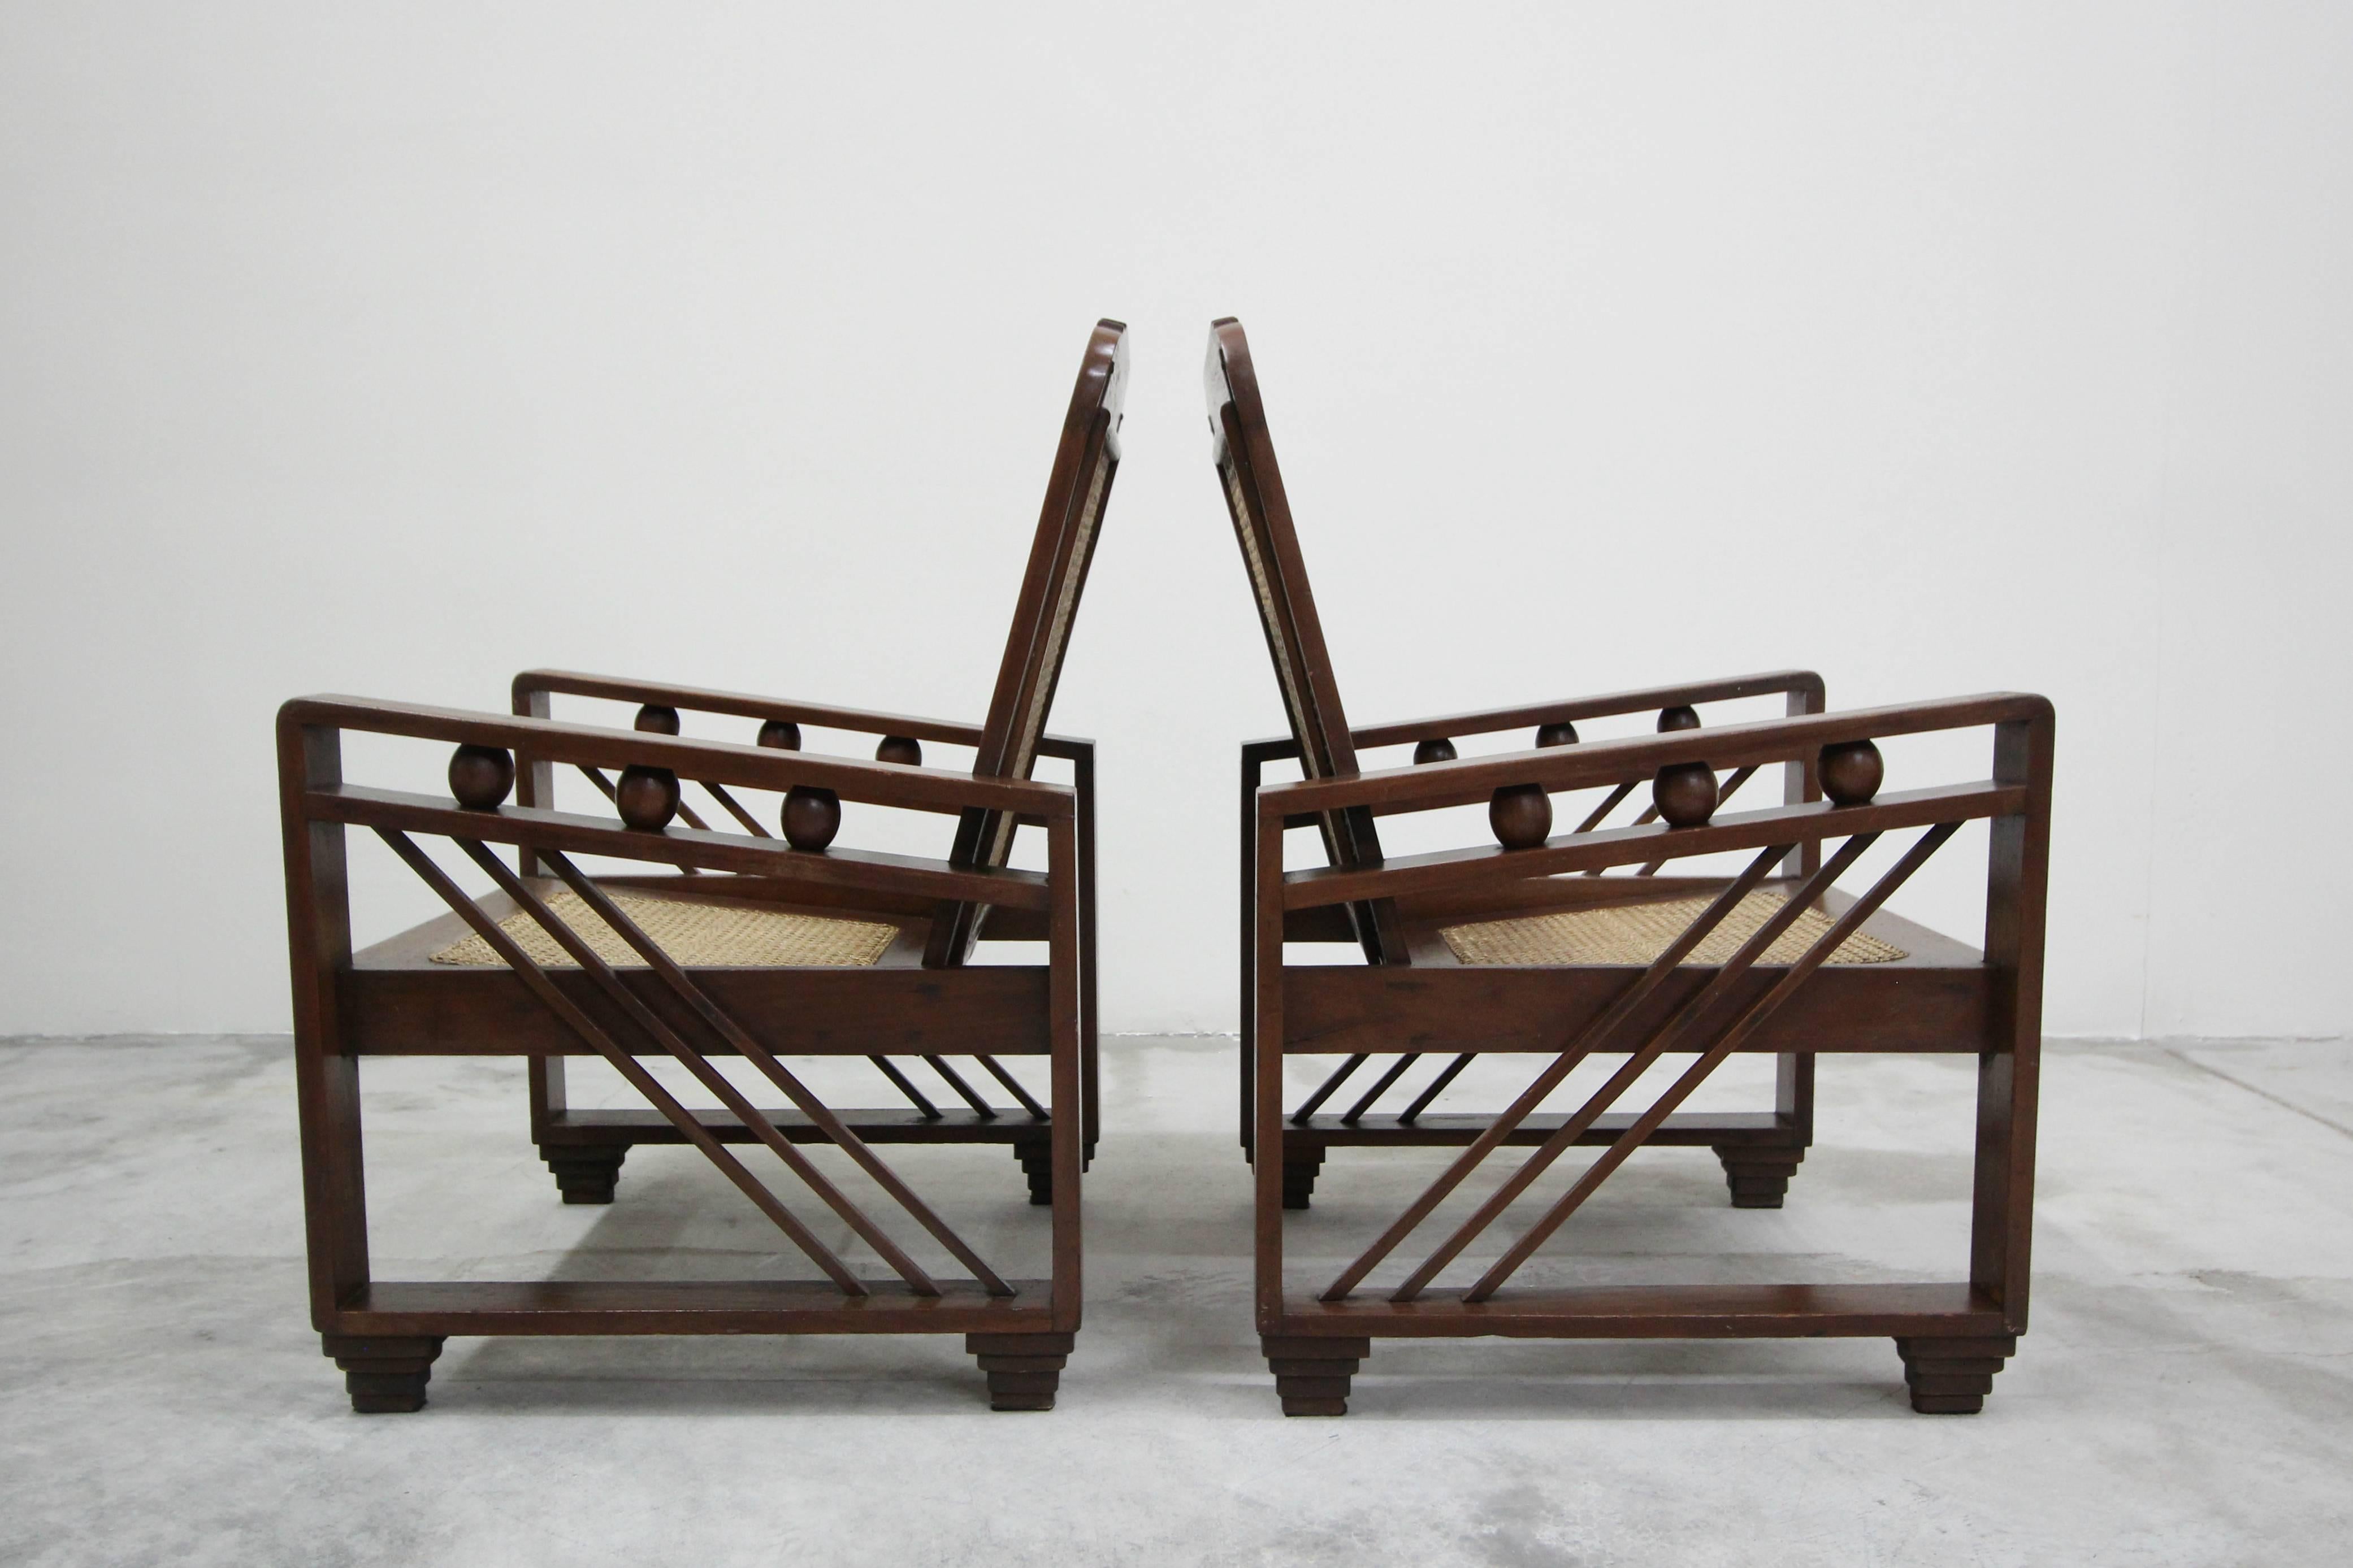 20th Century Pair of Antique French Art Deco Solid Wood Lounge Chairs with Cane Backs & Seats